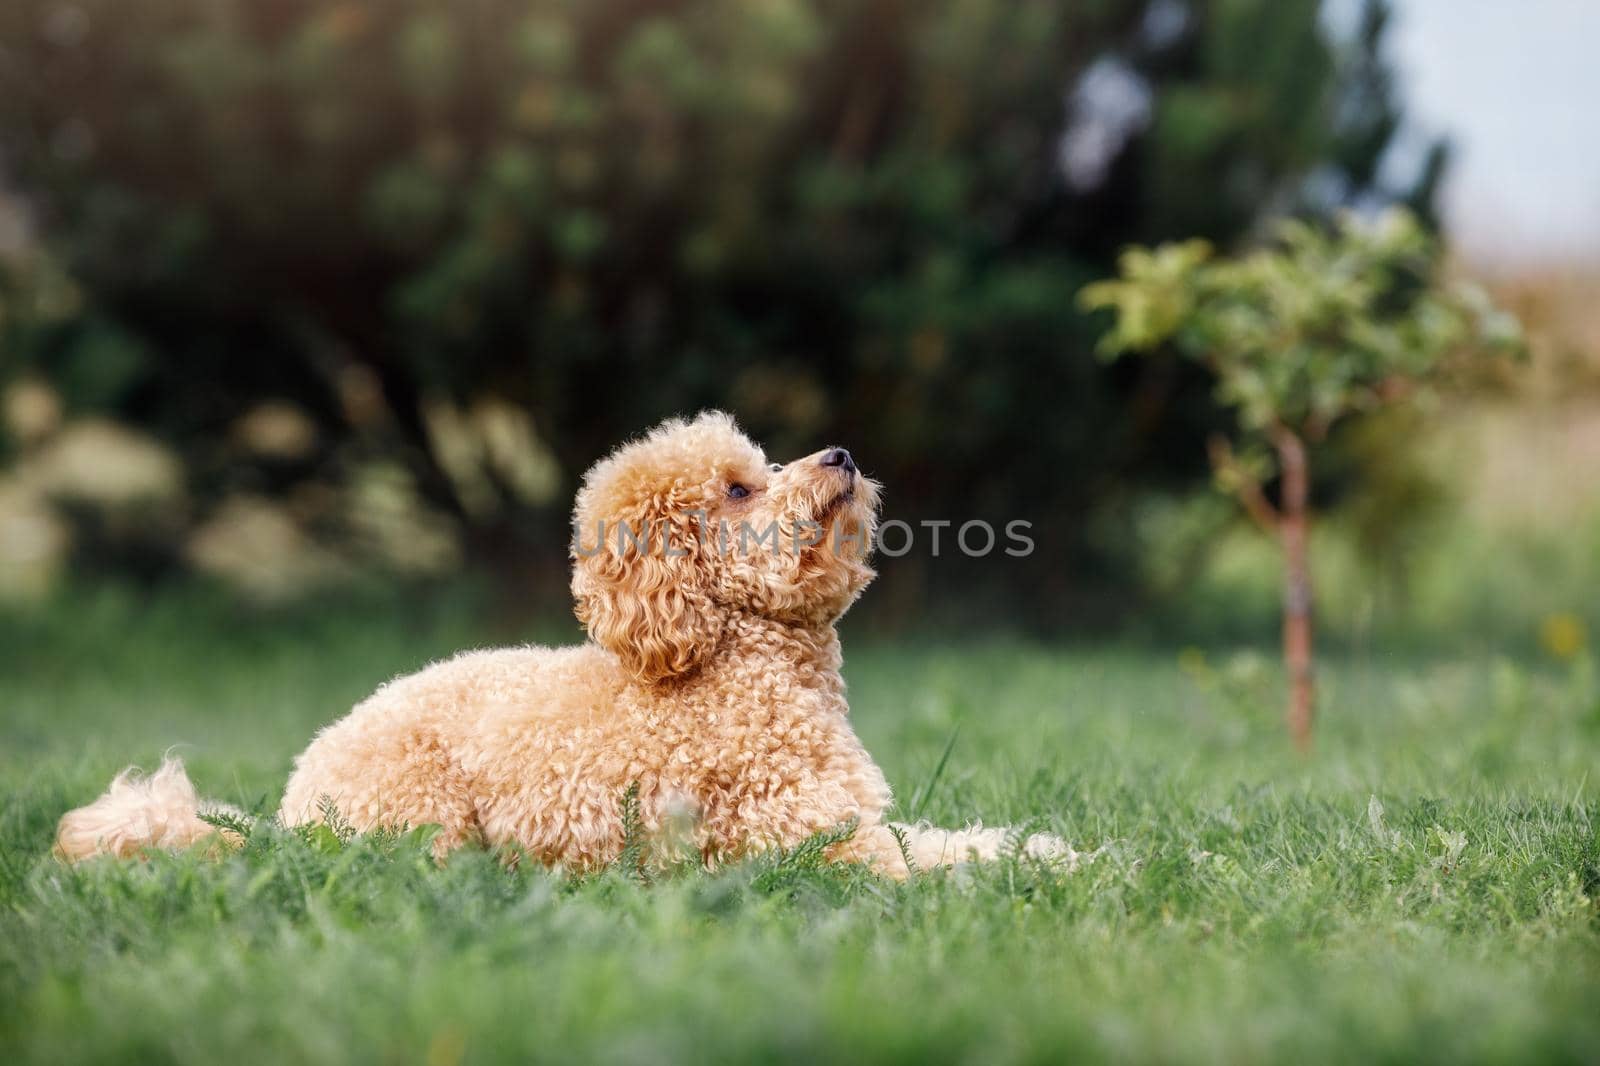 Poodle on the grass. Dog in nature. Dog of the Poodle breed.